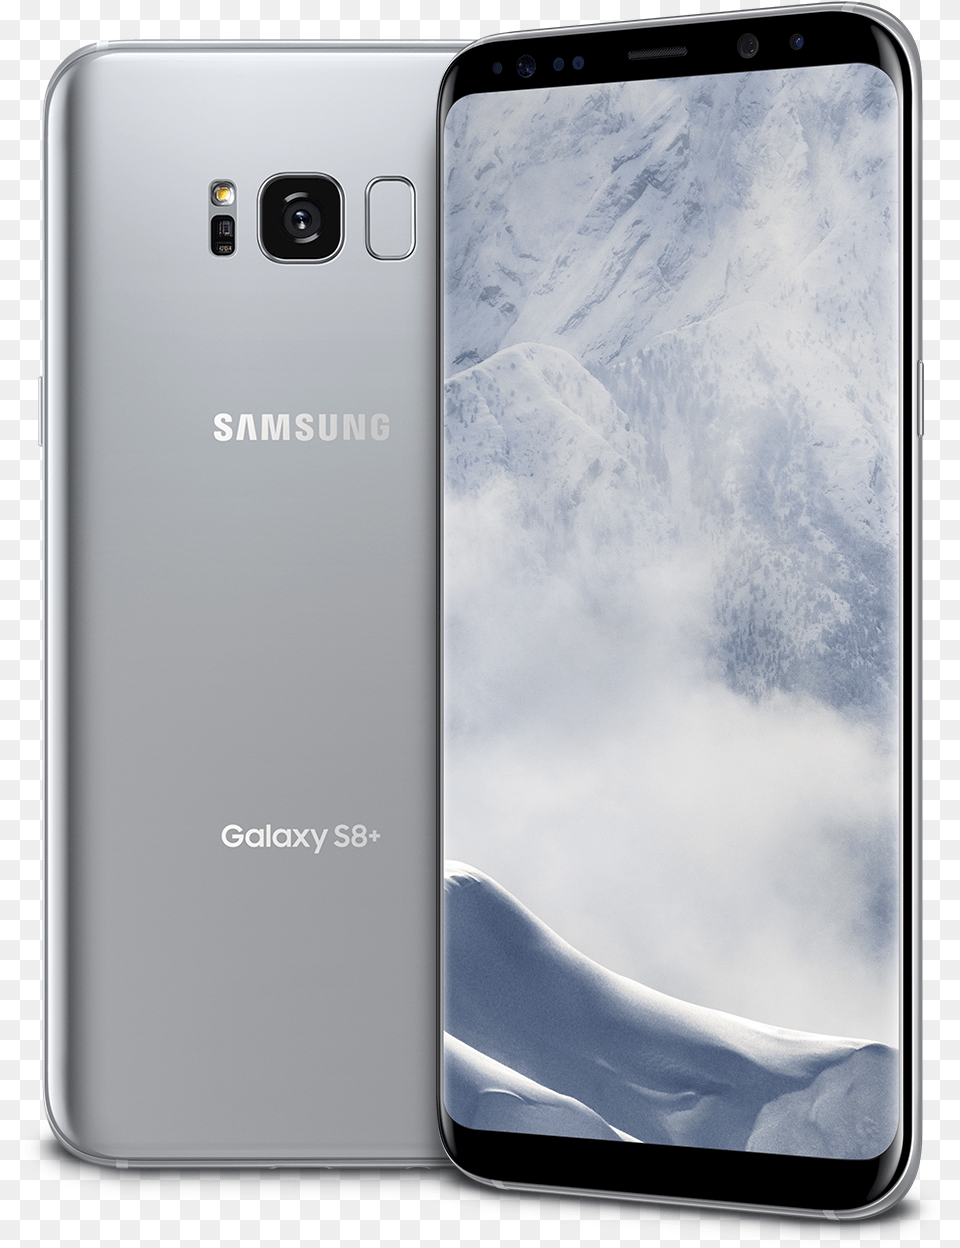 Samsung Galaxy S8 Samsung S8 Plus Price In Pakistan, Electronics, Mobile Phone, Phone, Iphone Free Png